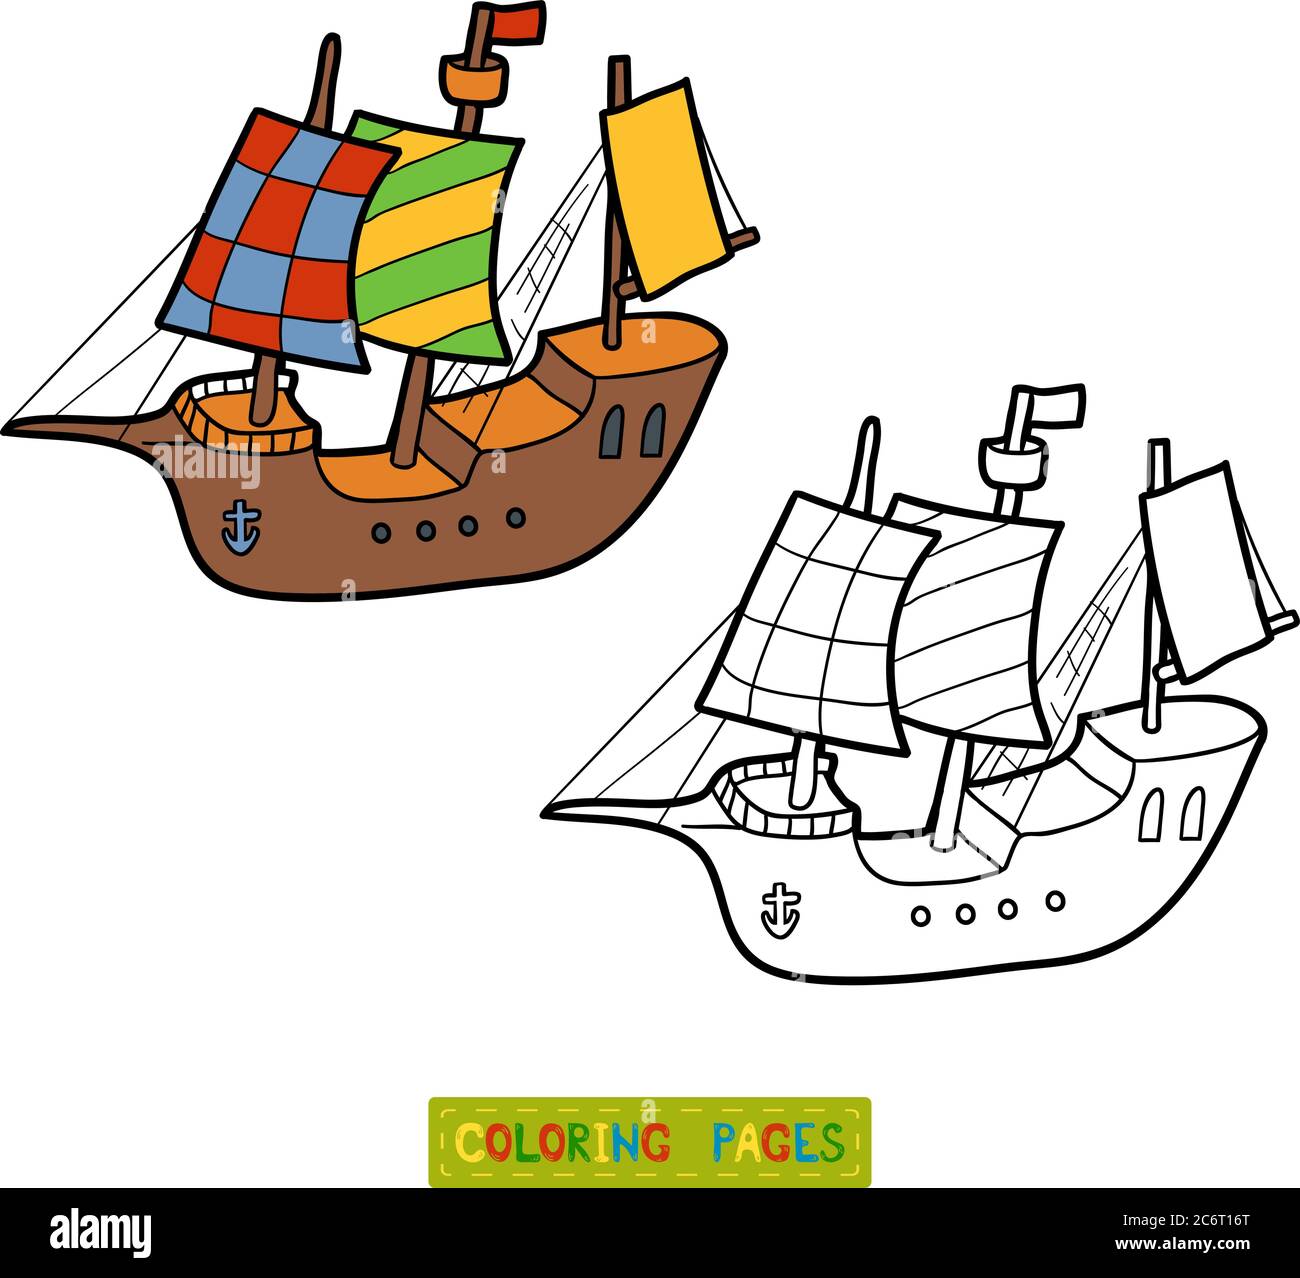 Download Coloring Book For Children Yacht Stock Vector Image Art Alamy